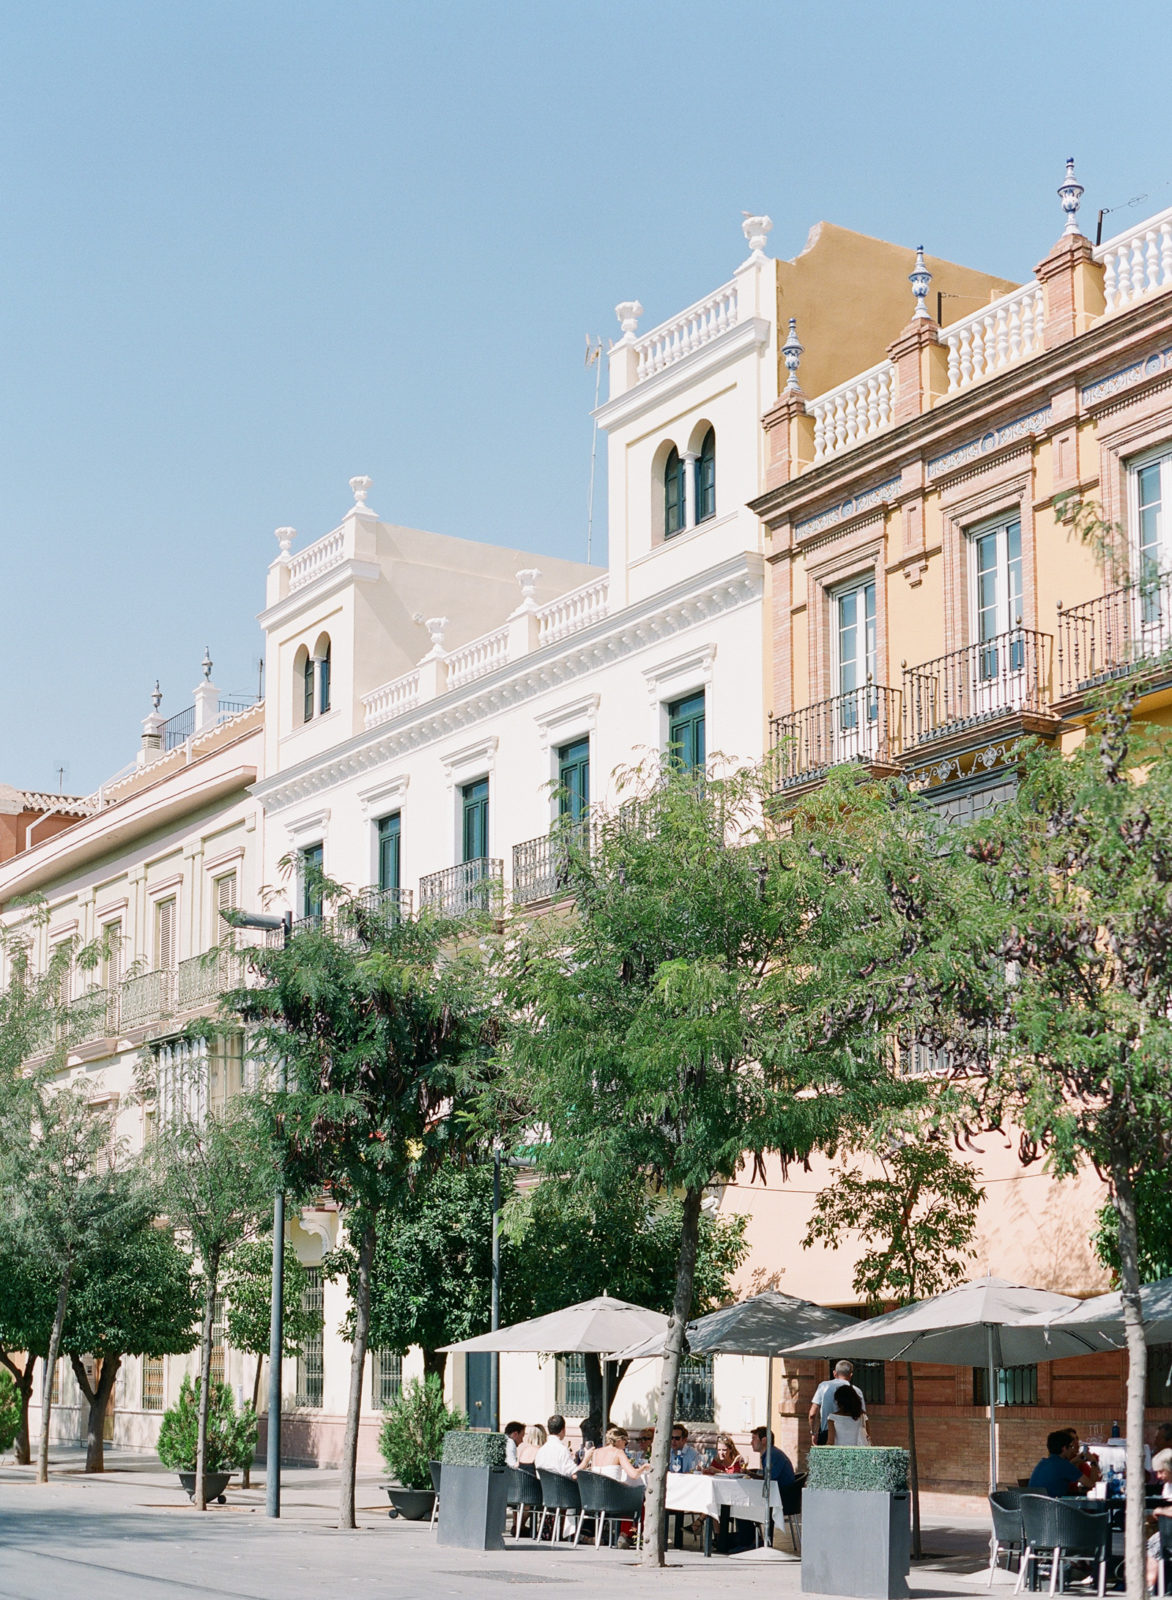 Seville Wedding Photographer | Seville Luxury Travel Guide | Spain Wedding Photography | Europe Film Photographer | Seville Architecture | Molly Carr Photography